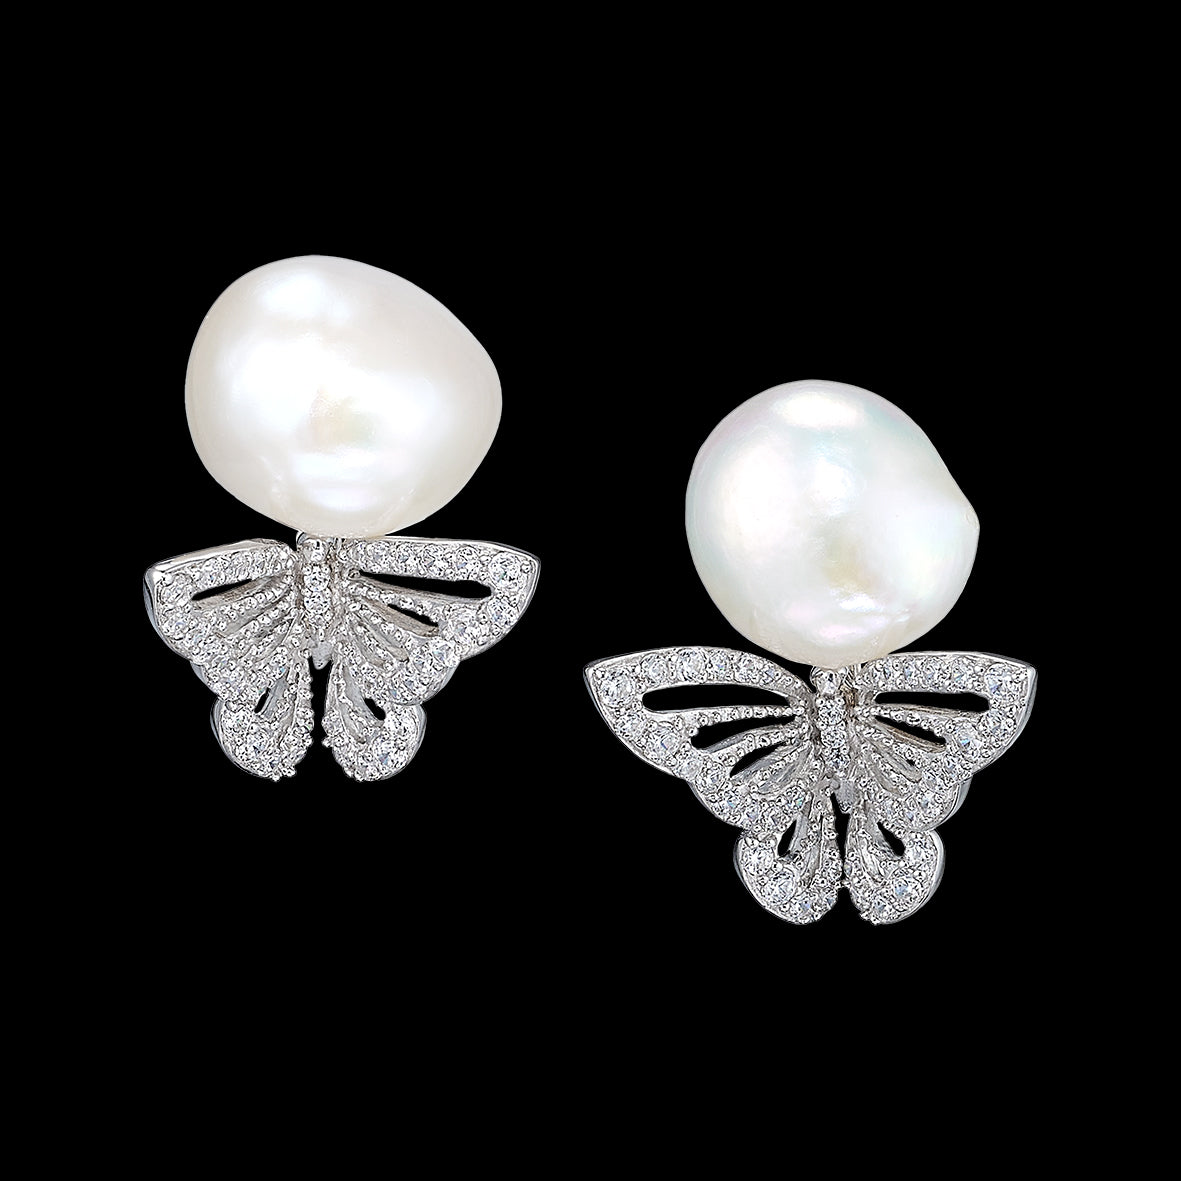 White Butterfly Pearl Earrings, Earrings, Anabela Chan Joaillerie - Fine jewelry with laboratory grown and created gemstones hand-crafted in the United Kingdom. Anabela Chan Joaillerie is the first fine jewellery brand in the world to champion laboratory-grown and created gemstones with high jewellery design, artisanal craftsmanship and a focus on ethical and sustainable innovations.